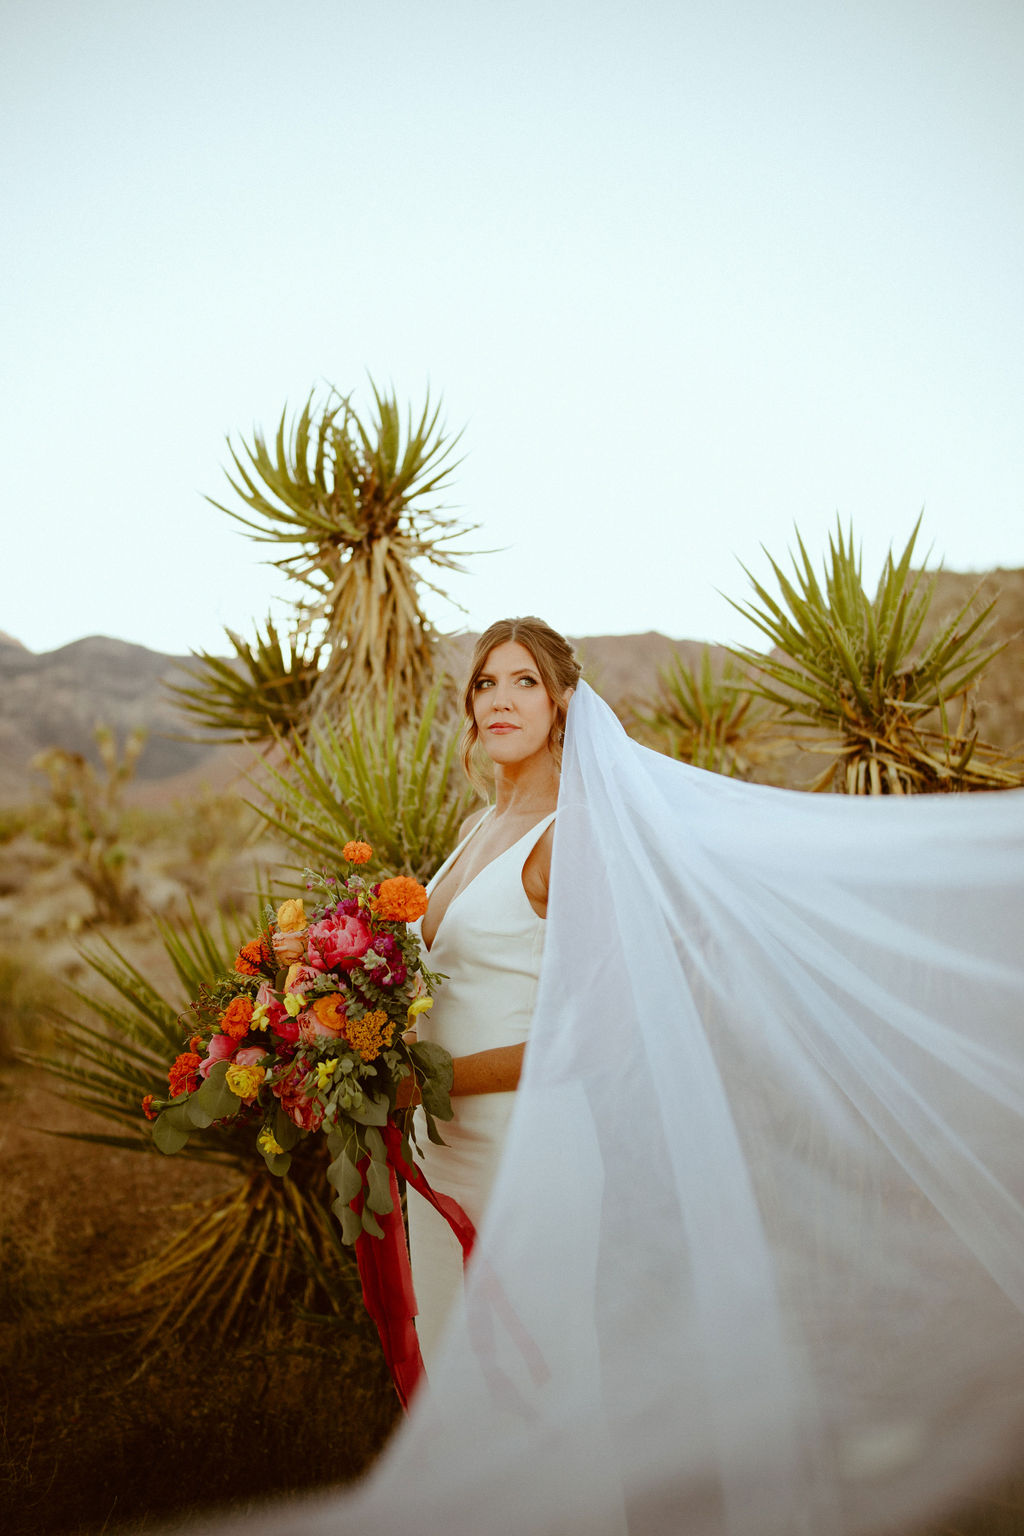 Bride with long white veil holding bright and colorful bouquet in Las Vegas outdoor desert wedding 